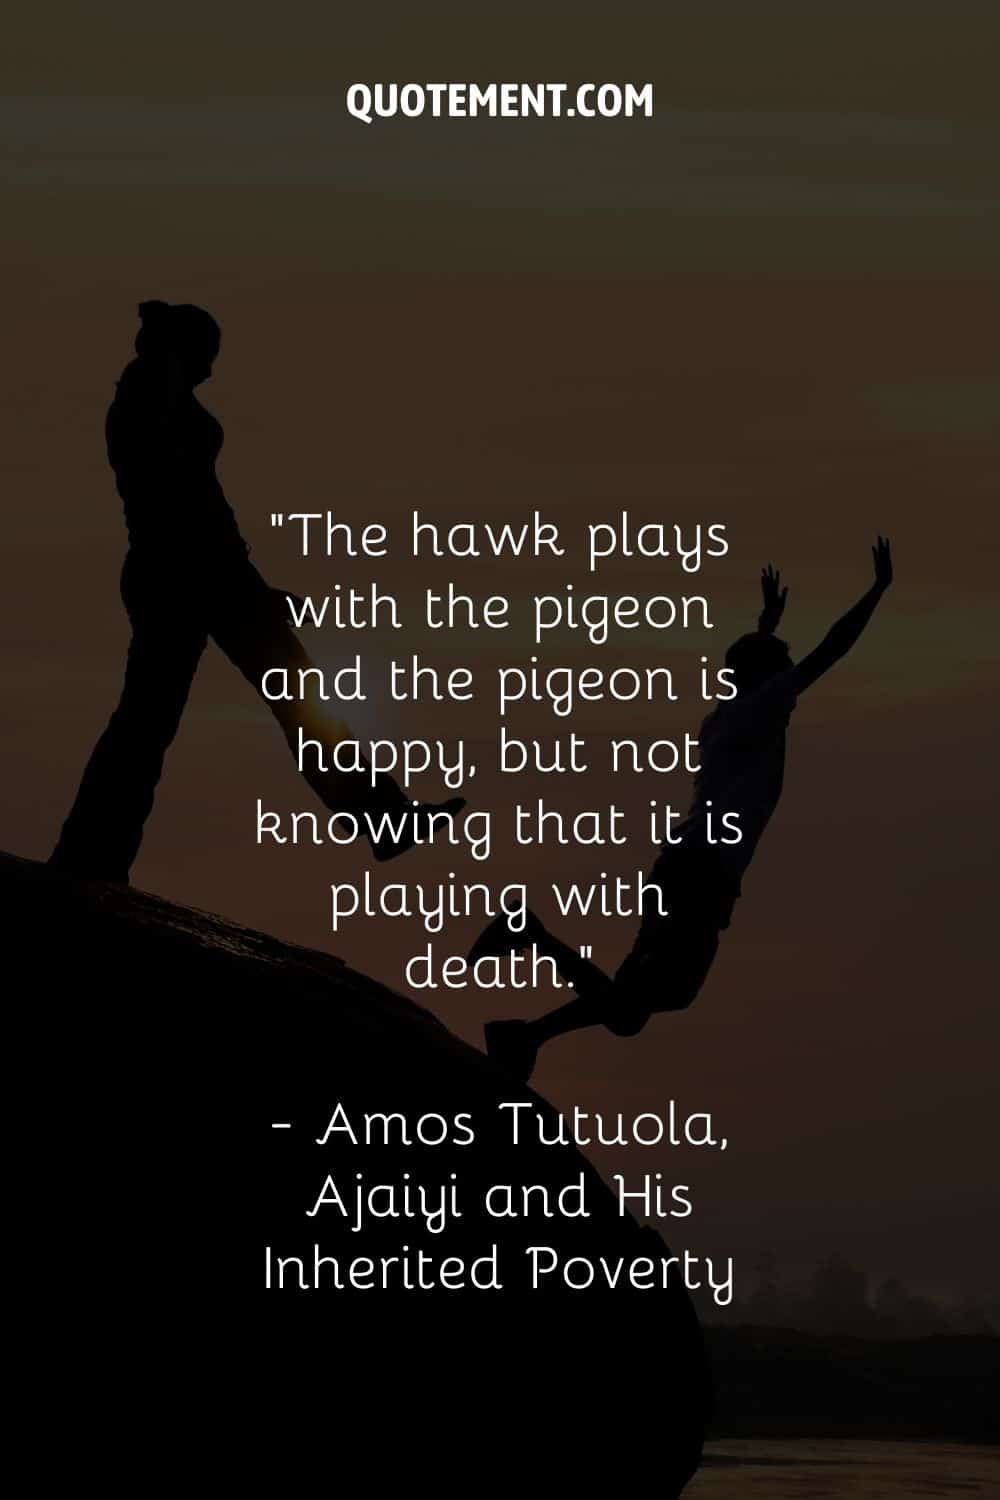 The hawk plays with the pigeon and the pigeon is happy, but not knowing that it is playing with death.